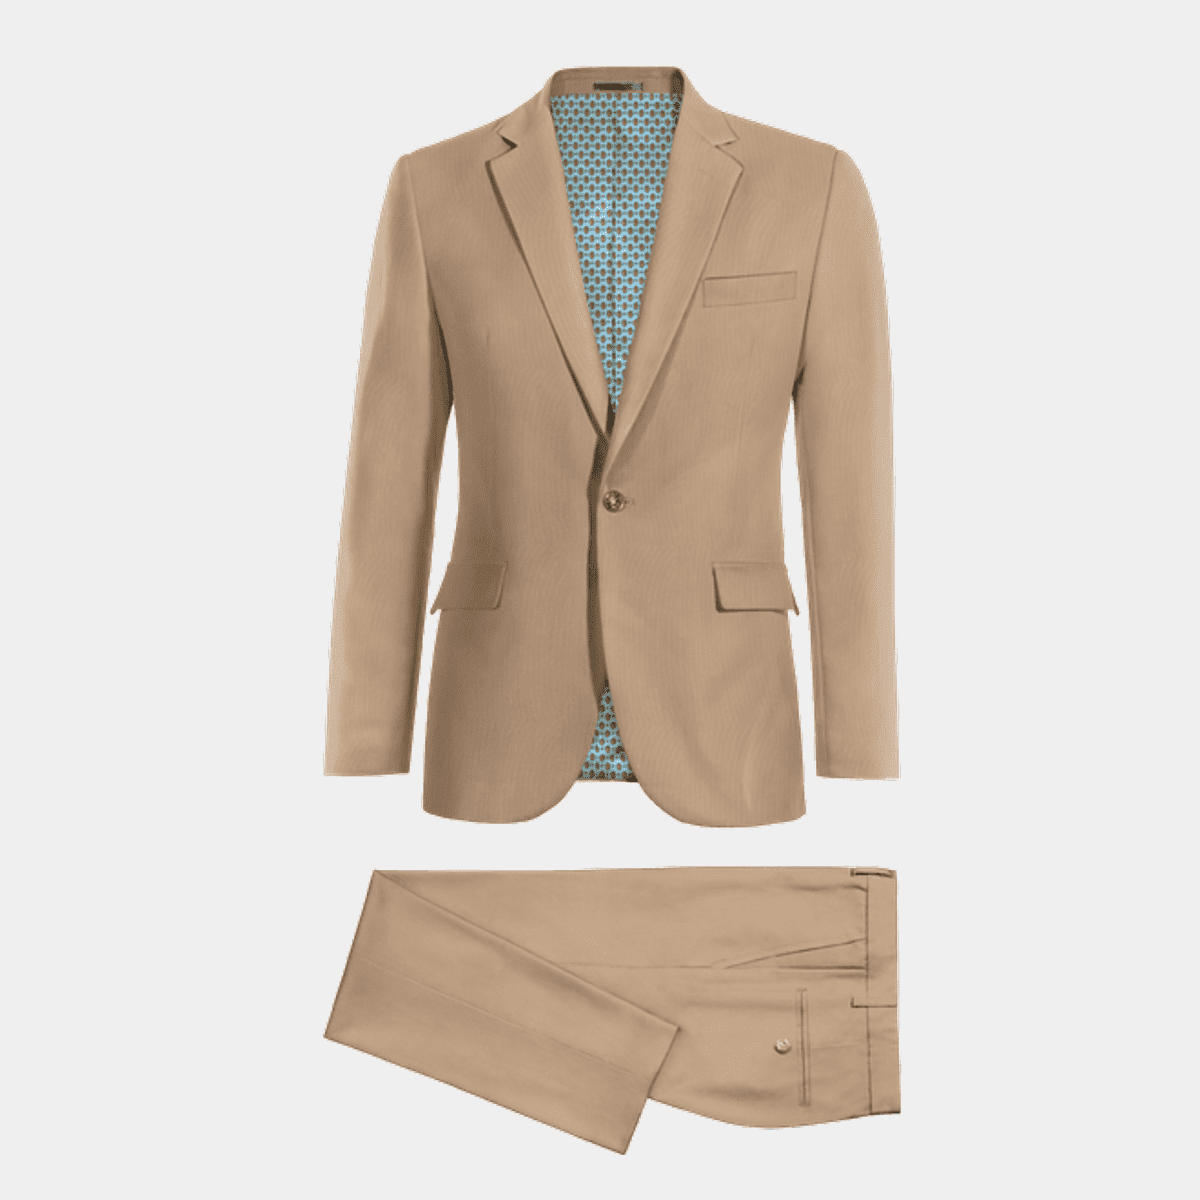 Earth Tones Suits | Hockerty